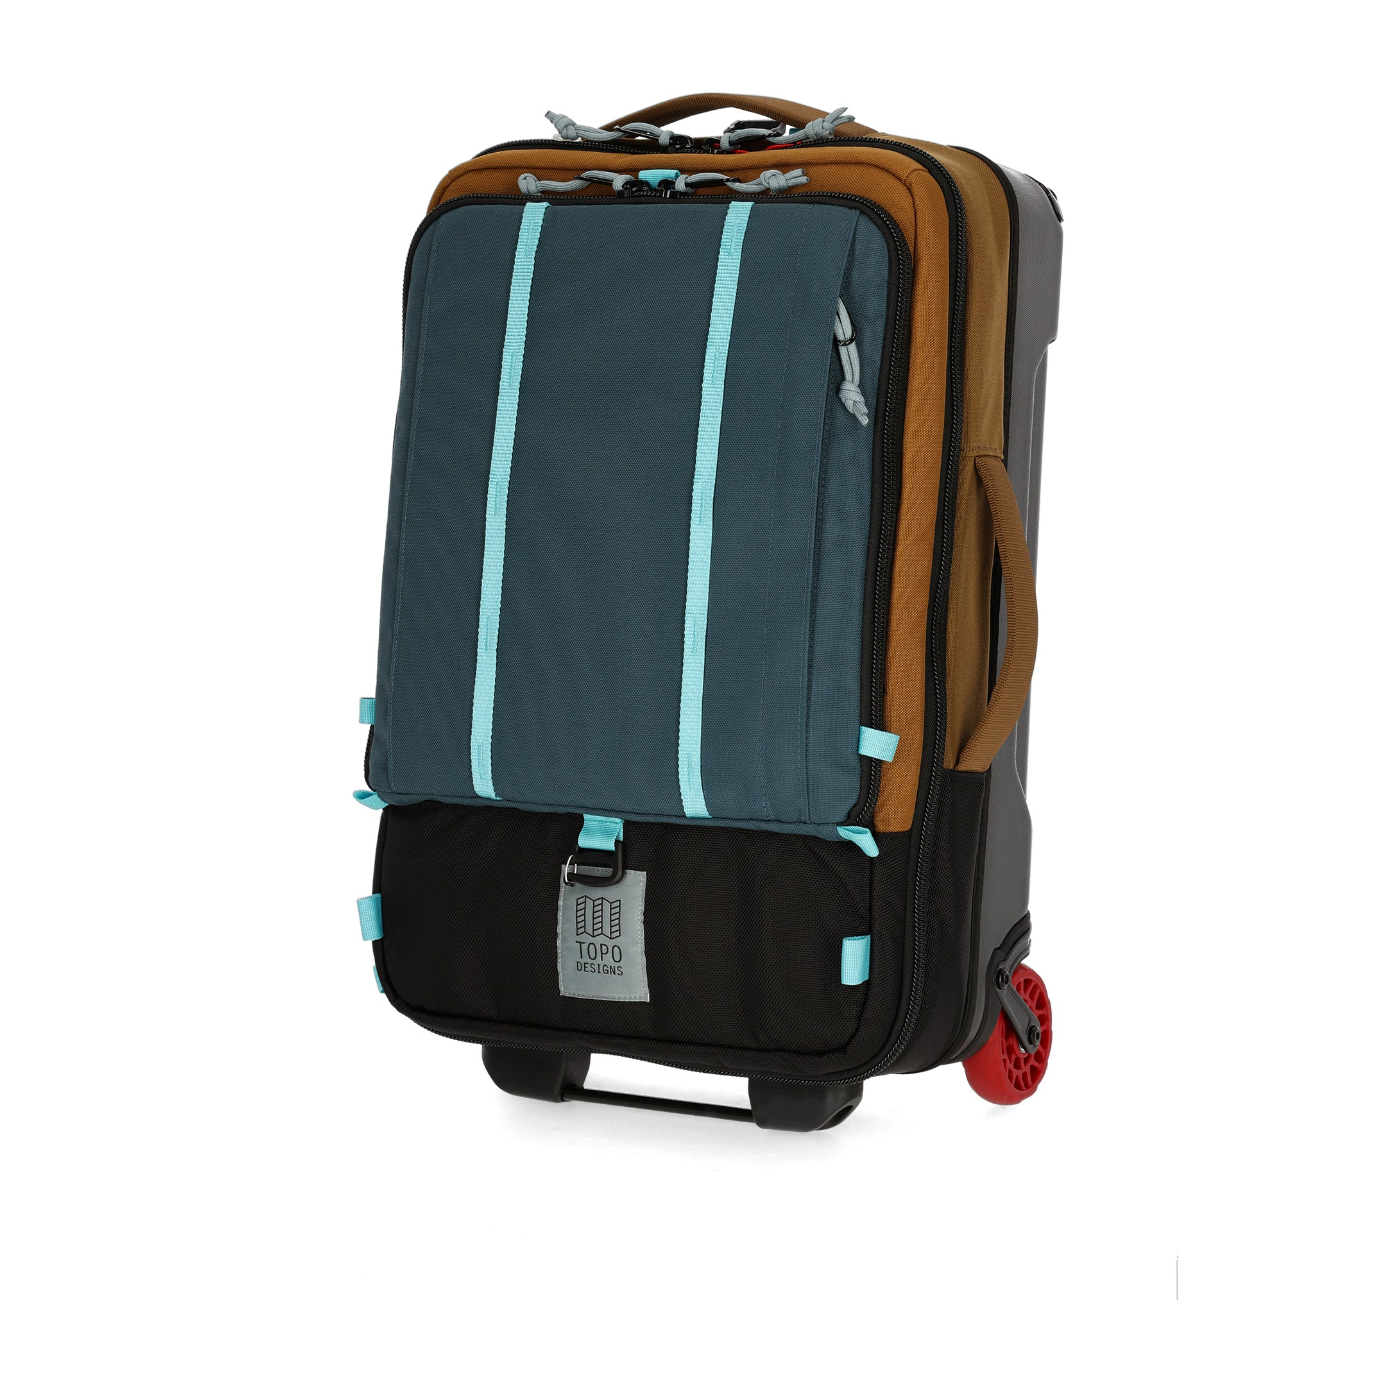 <p><strong>$299.00</strong></p><p><a href="https://topodesigns.com/products/global-travel-bag-roller?variant=42571110580277">Shop Now</a></p><p>Backpack meets roller suitcase in this hybrid style that can handle just about whatever you throw at it. A structured outer means you won’t have to worry about items getting crushed, and the small size means you can carry it right on to the plane. </p><p><strong>Materials:</strong> Recycled nylon</p><p><strong>Size:</strong> 44-liter capacity</p><p><strong>Colors: </strong>Desert palm, olive, black, and more</p><p><strong>What reviewers are saying:</strong> “Great All terrain bag. Bought this bag for a multi-city European vacation. It performed flawlessly. The wheels easily handled the rough sidewalks and cobblestone without any damage to the bag or it’s contents.”</p>